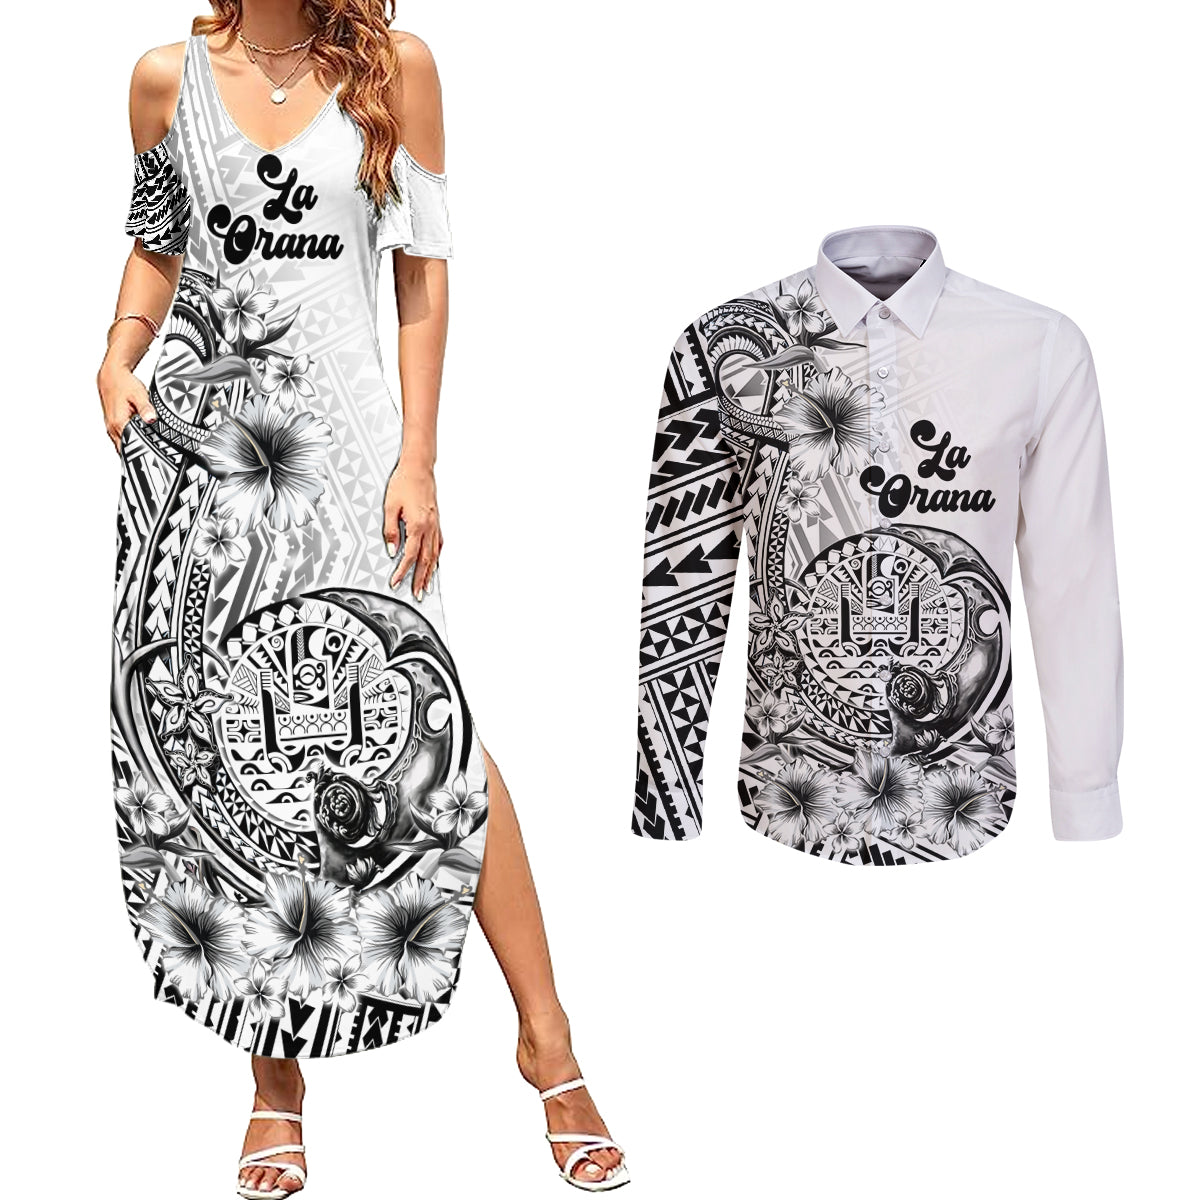 La Orana Tahiti Personalised Couples Matching Summer Maxi Dress and Long Sleeve Button Shirt French Polynesia Hook Tattoo Special White Color LT9 White - Polynesian Pride